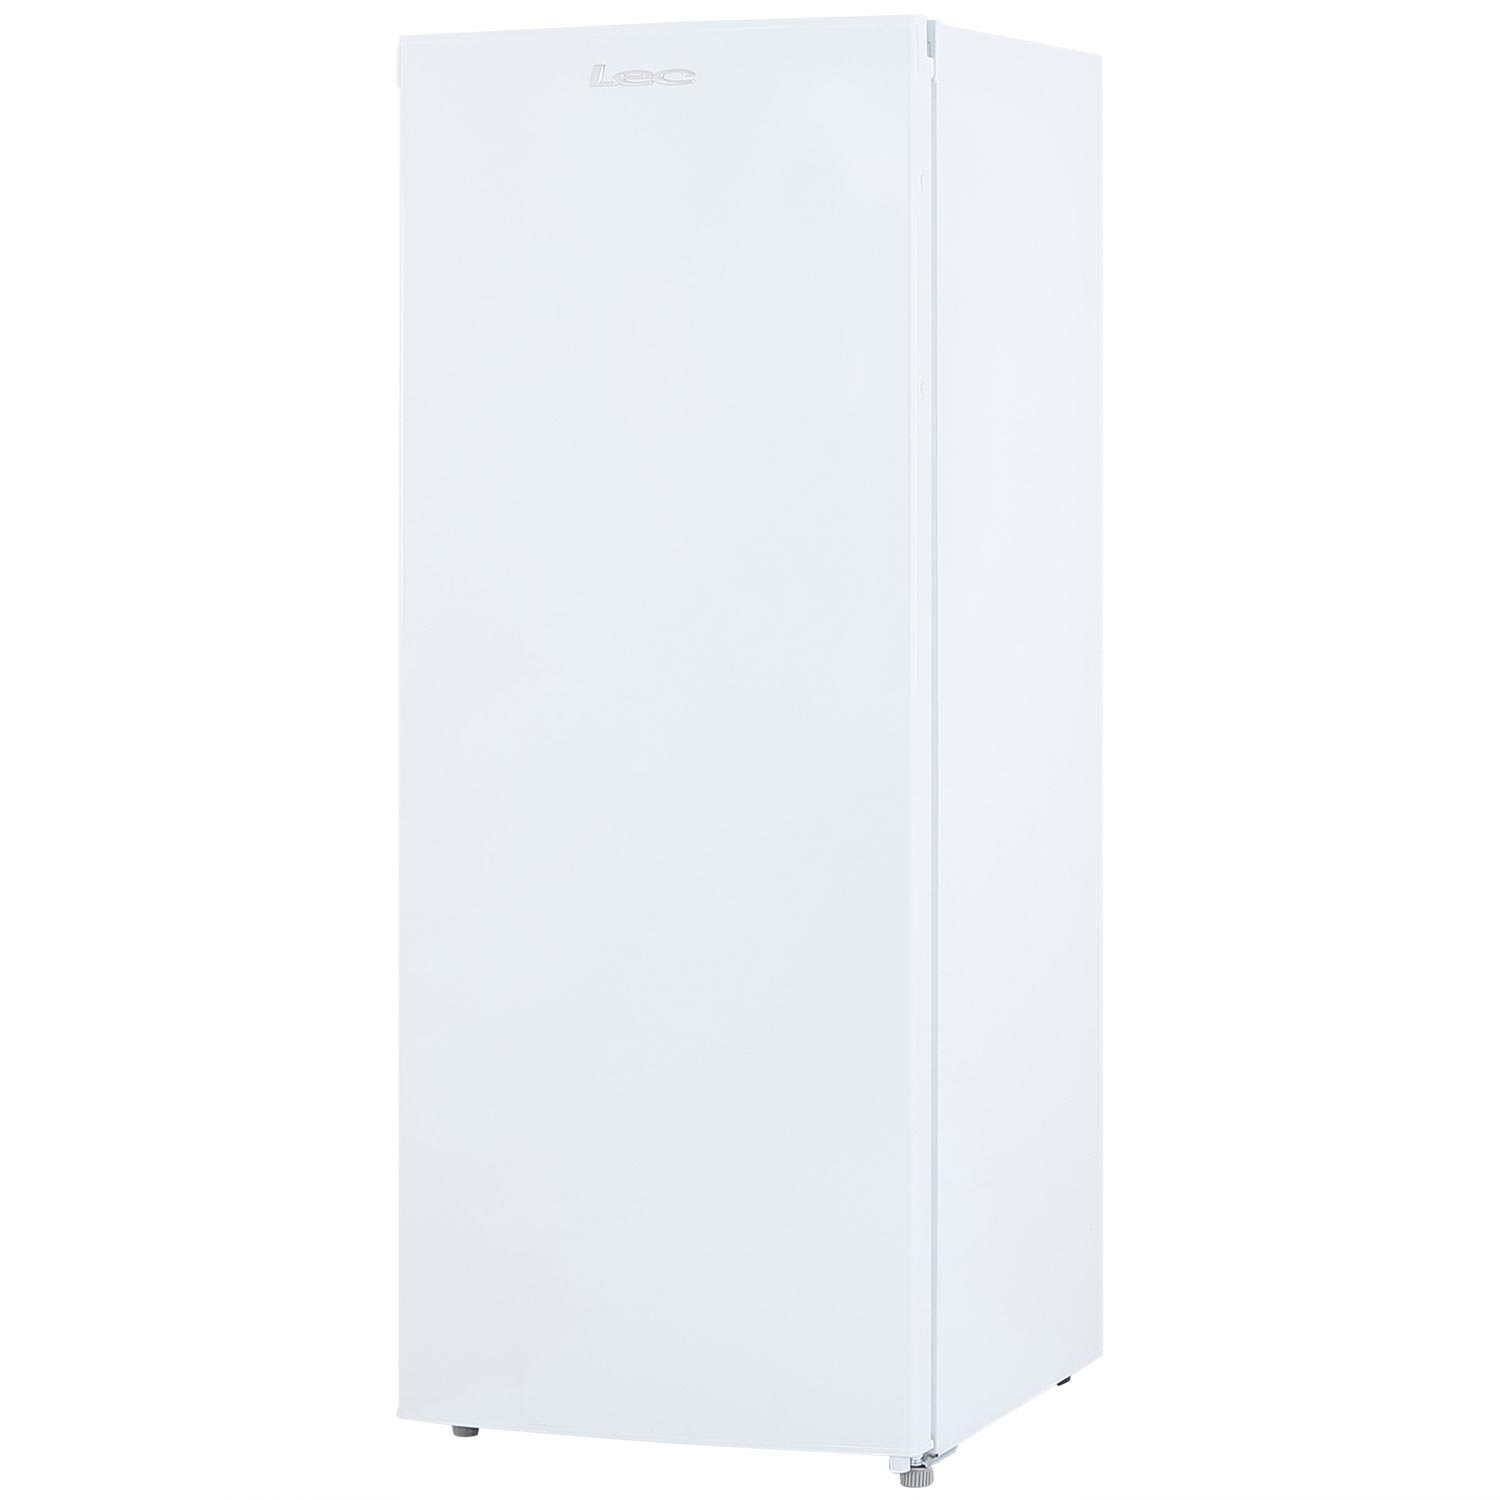 Lec 55cm Tall Freezer - White - A+ Rated - 2